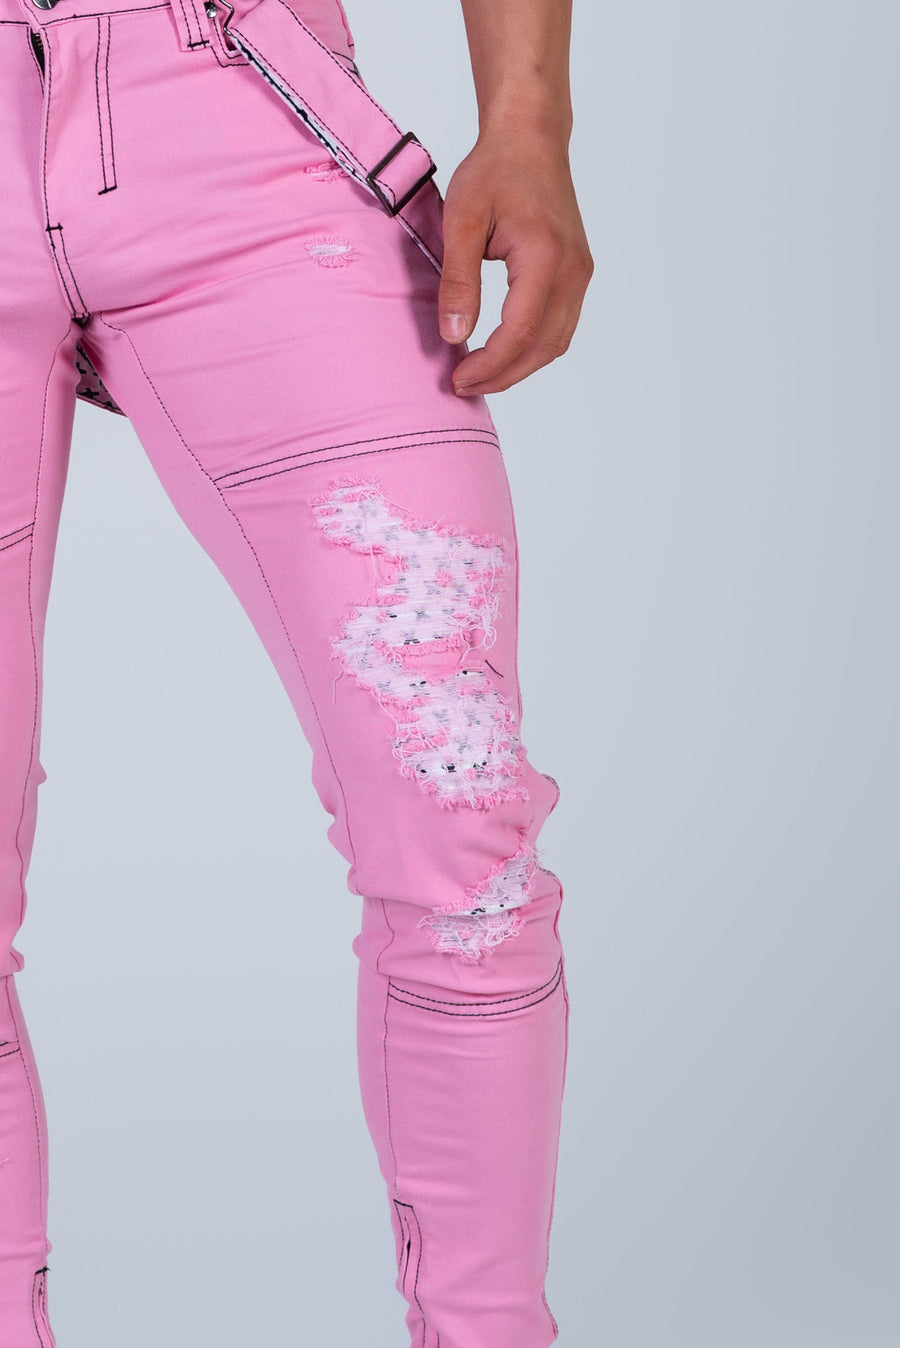 CHERRY, PINK AND WHITE JEANS Bundle